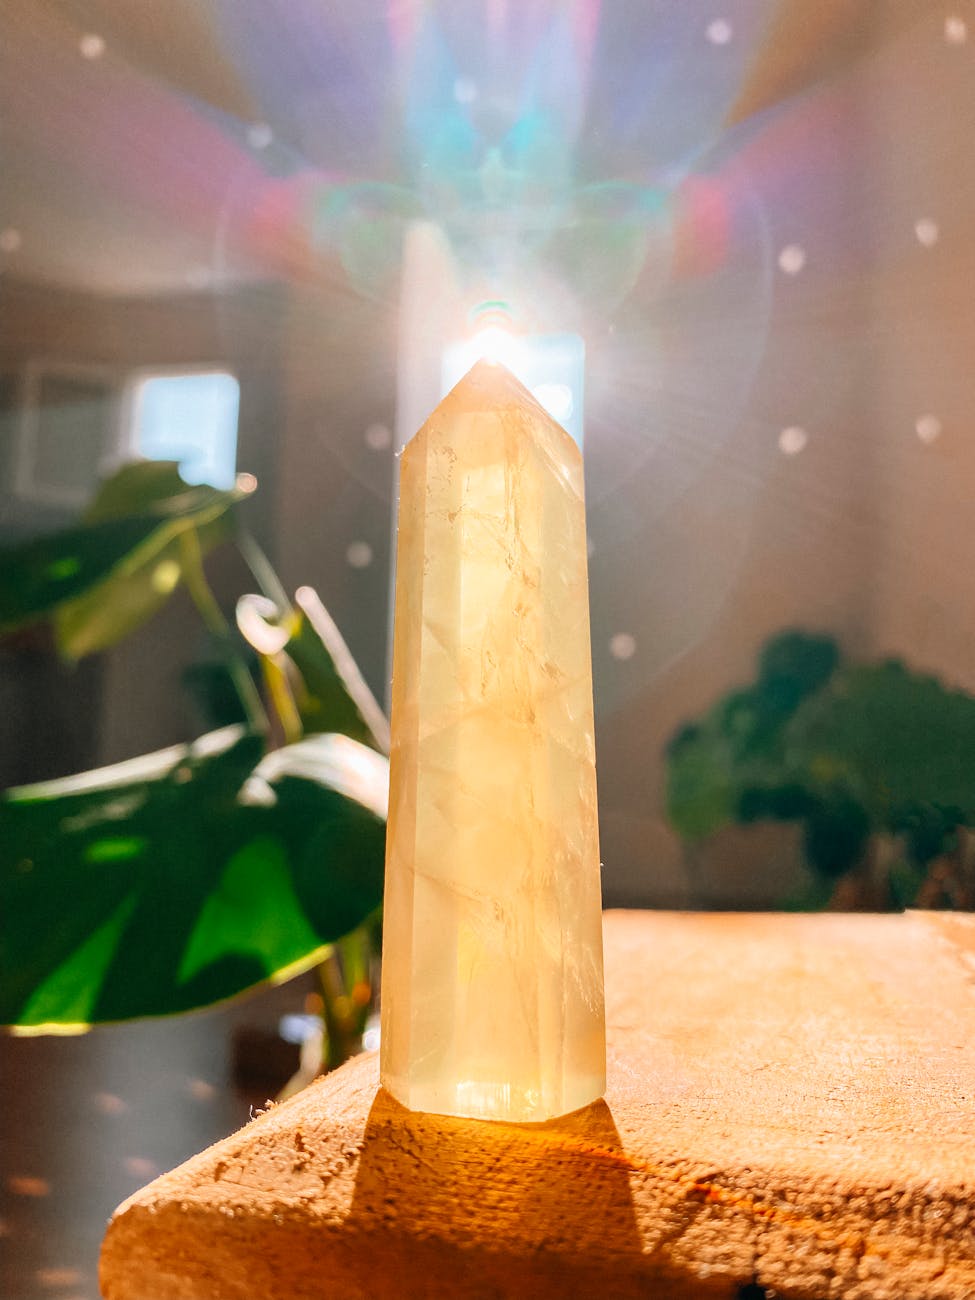 A tower of a translucent, honey-colored mineral sits on a wooden table. In the background, there are several houseplants and a rainbowy lens flare. 